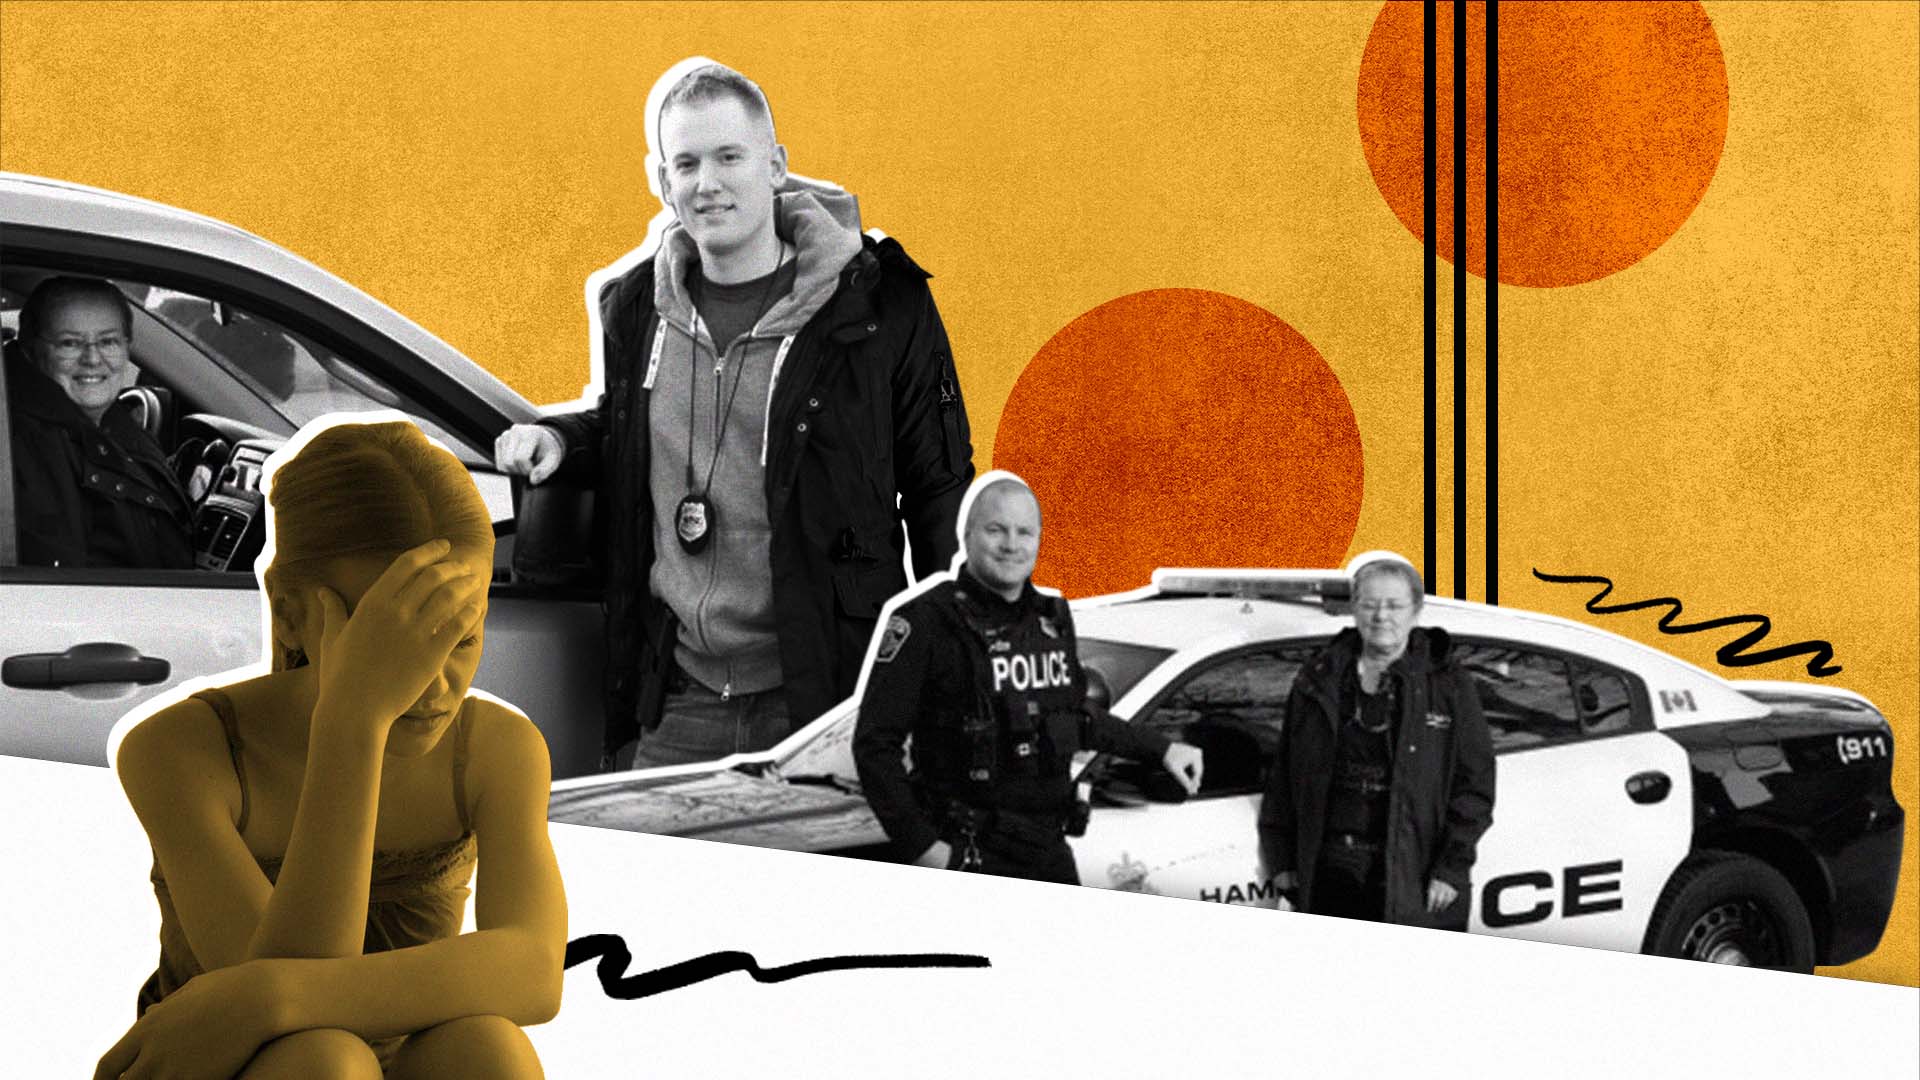 Canada’s police force became an ally for mental health patients